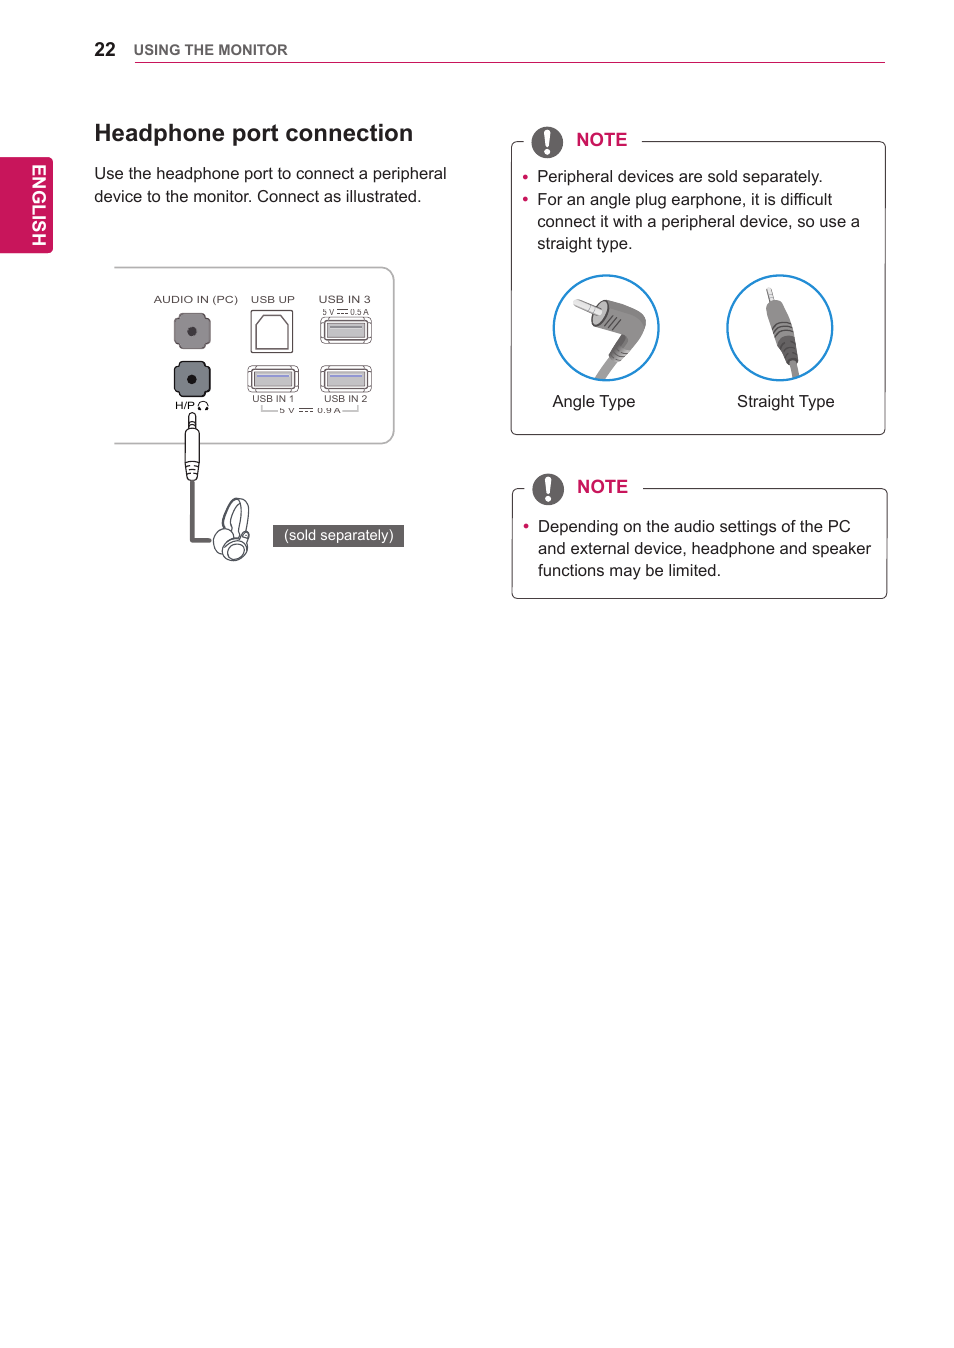 Headphone port connection, English, Angle type straight type | LG 29EA73-P User Manual | Page 22 / 39